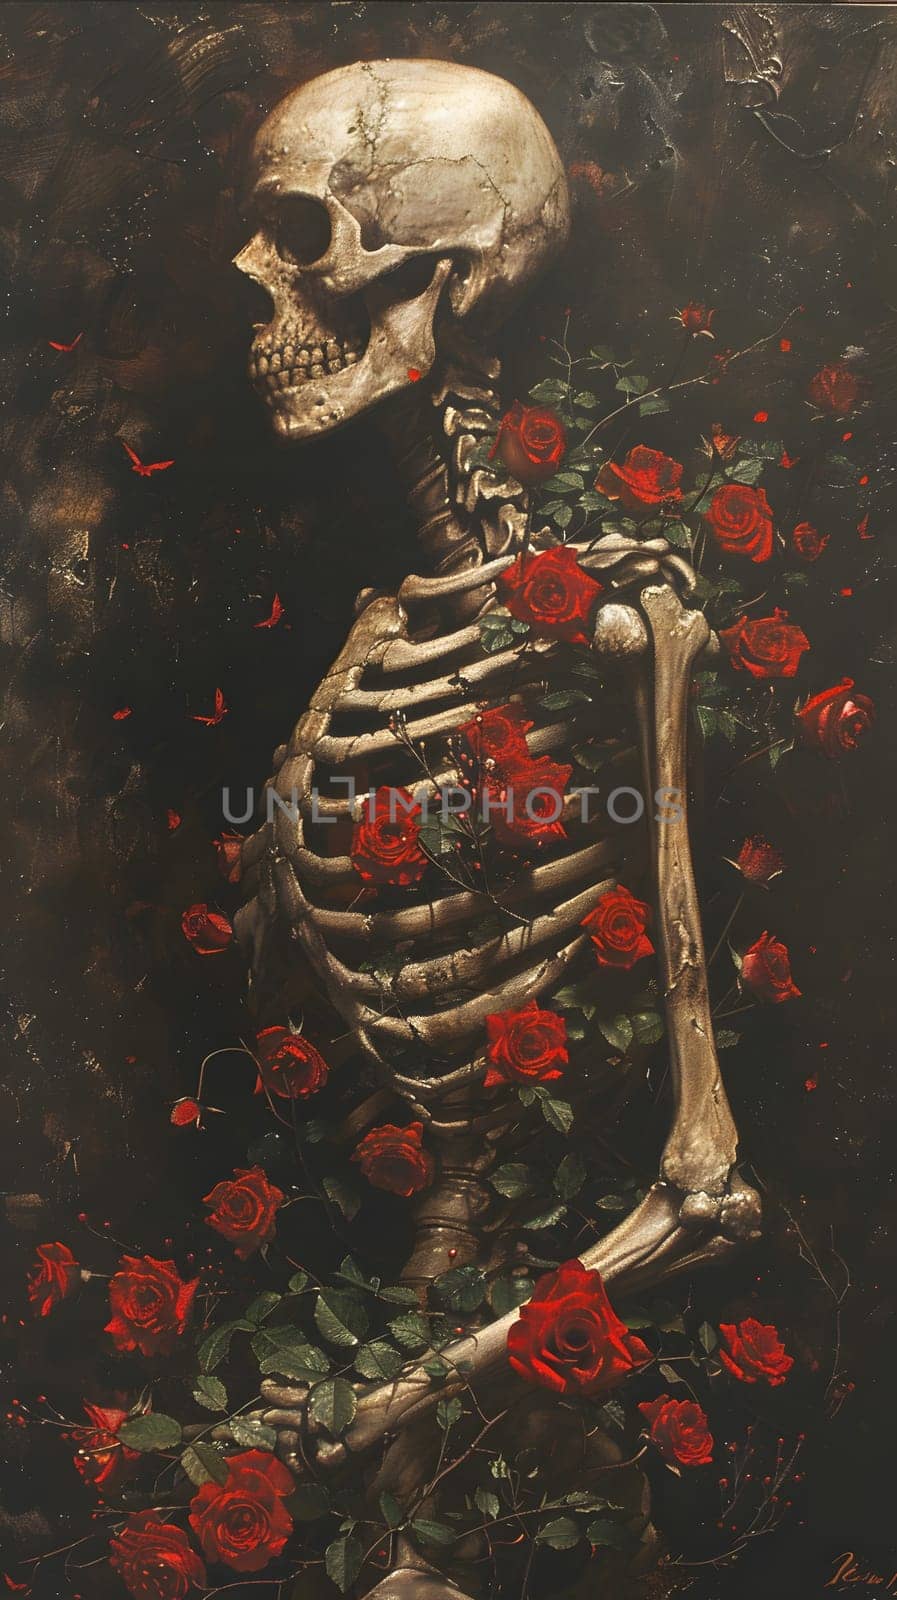 Skeleton in painting surrounded by red roses, artistic and eerie by Nadtochiy